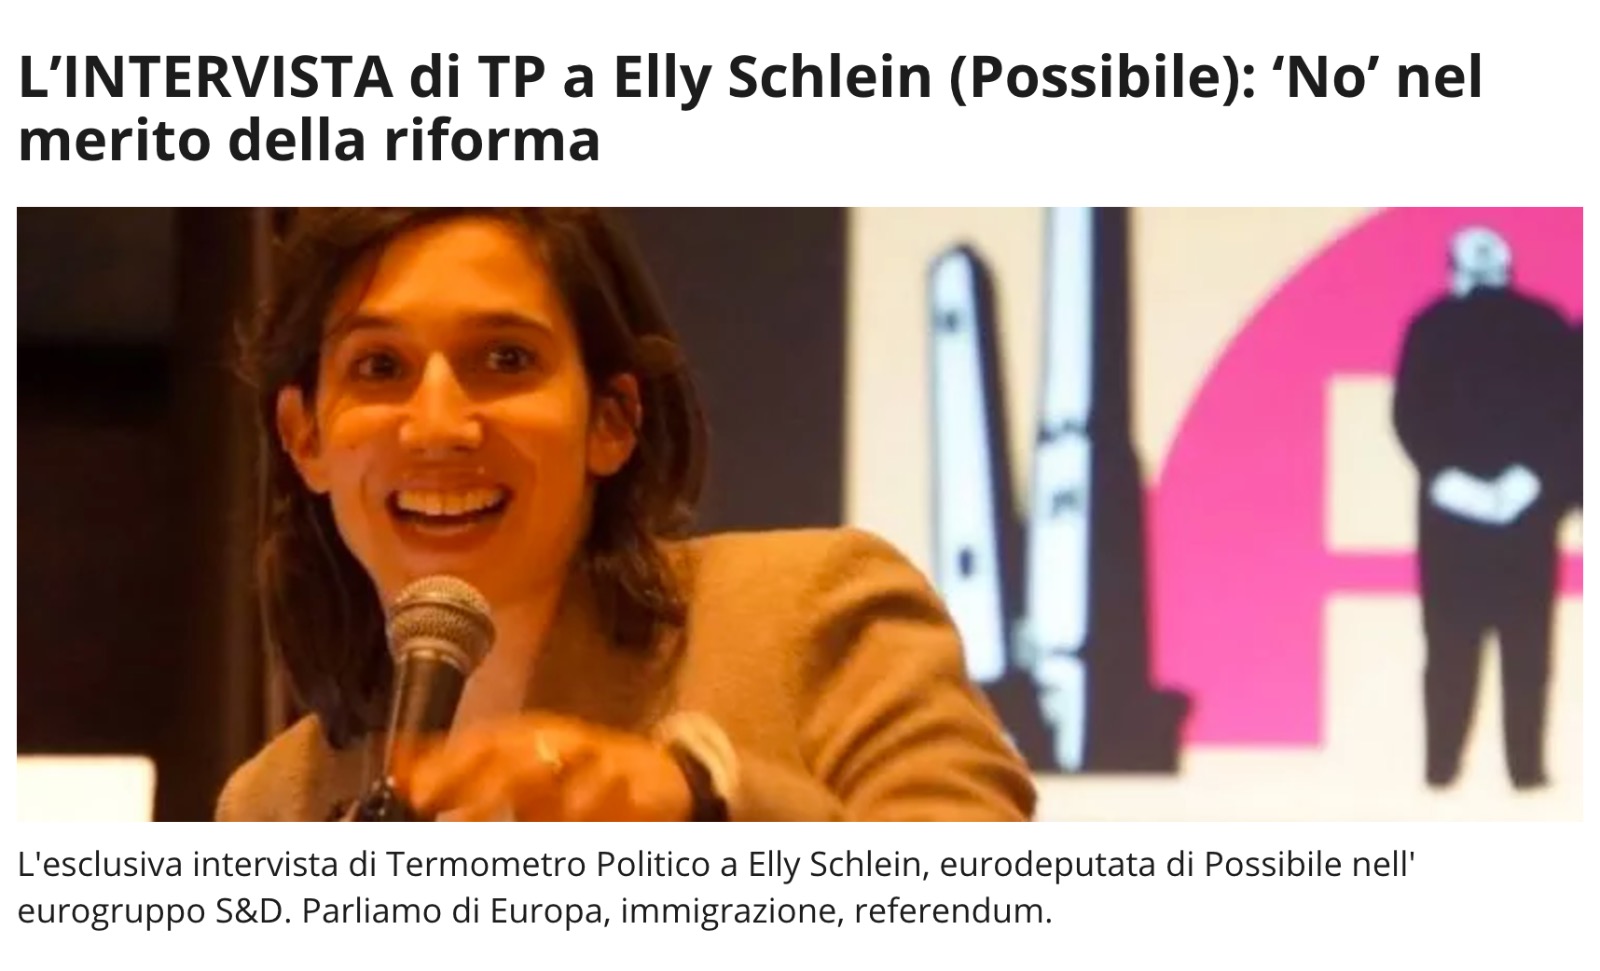 Elly Schlein on the European Parliament: interview conducted by Alessandro Faggiano for Termometro Politico